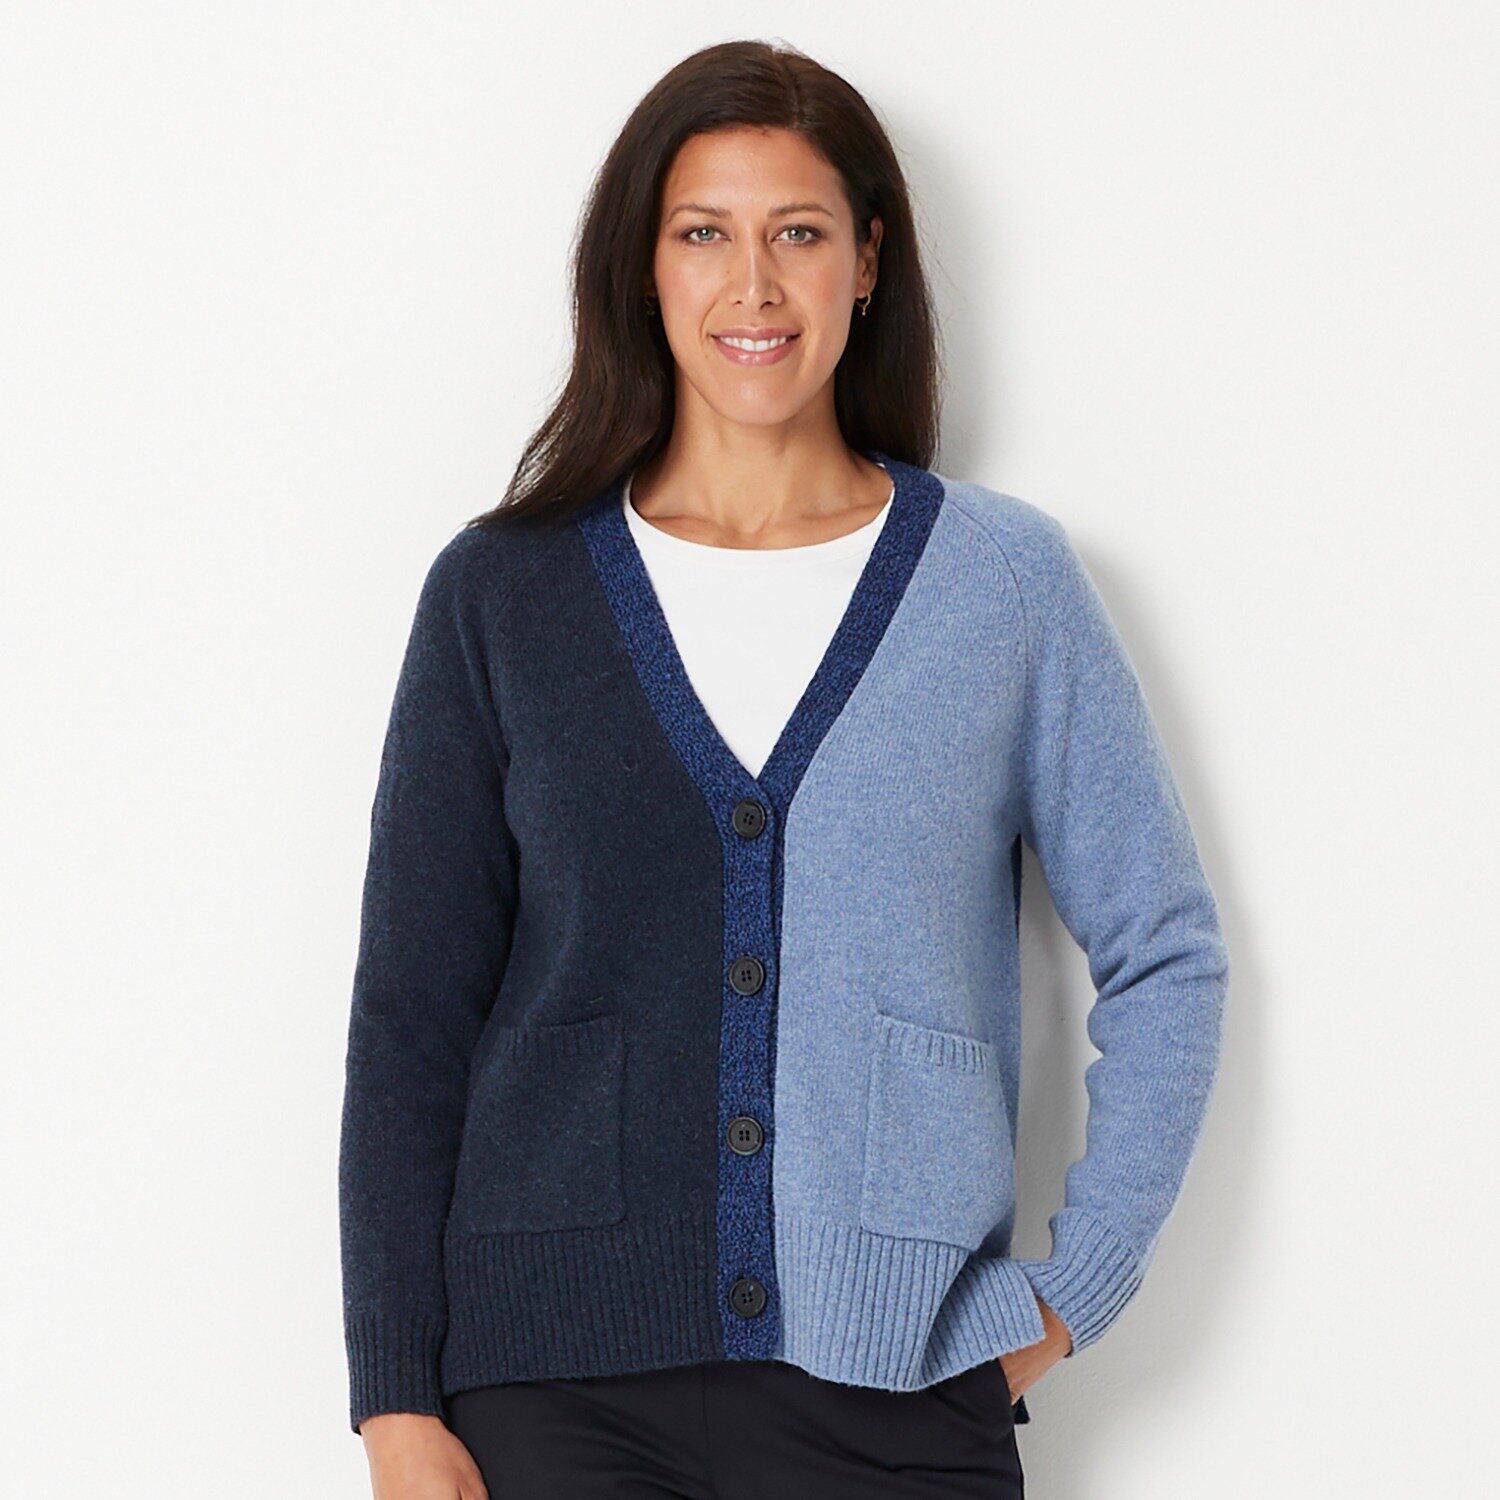 A cardigan is perfect for those cooler Autumn mornings.  This gorgeous one is a lambswool blend and features 3 different shades of blue. Why not visit us over Easter either in store or shop online.

https://bit.ly/3TE2JQq

#shoplocal #stylish #winter